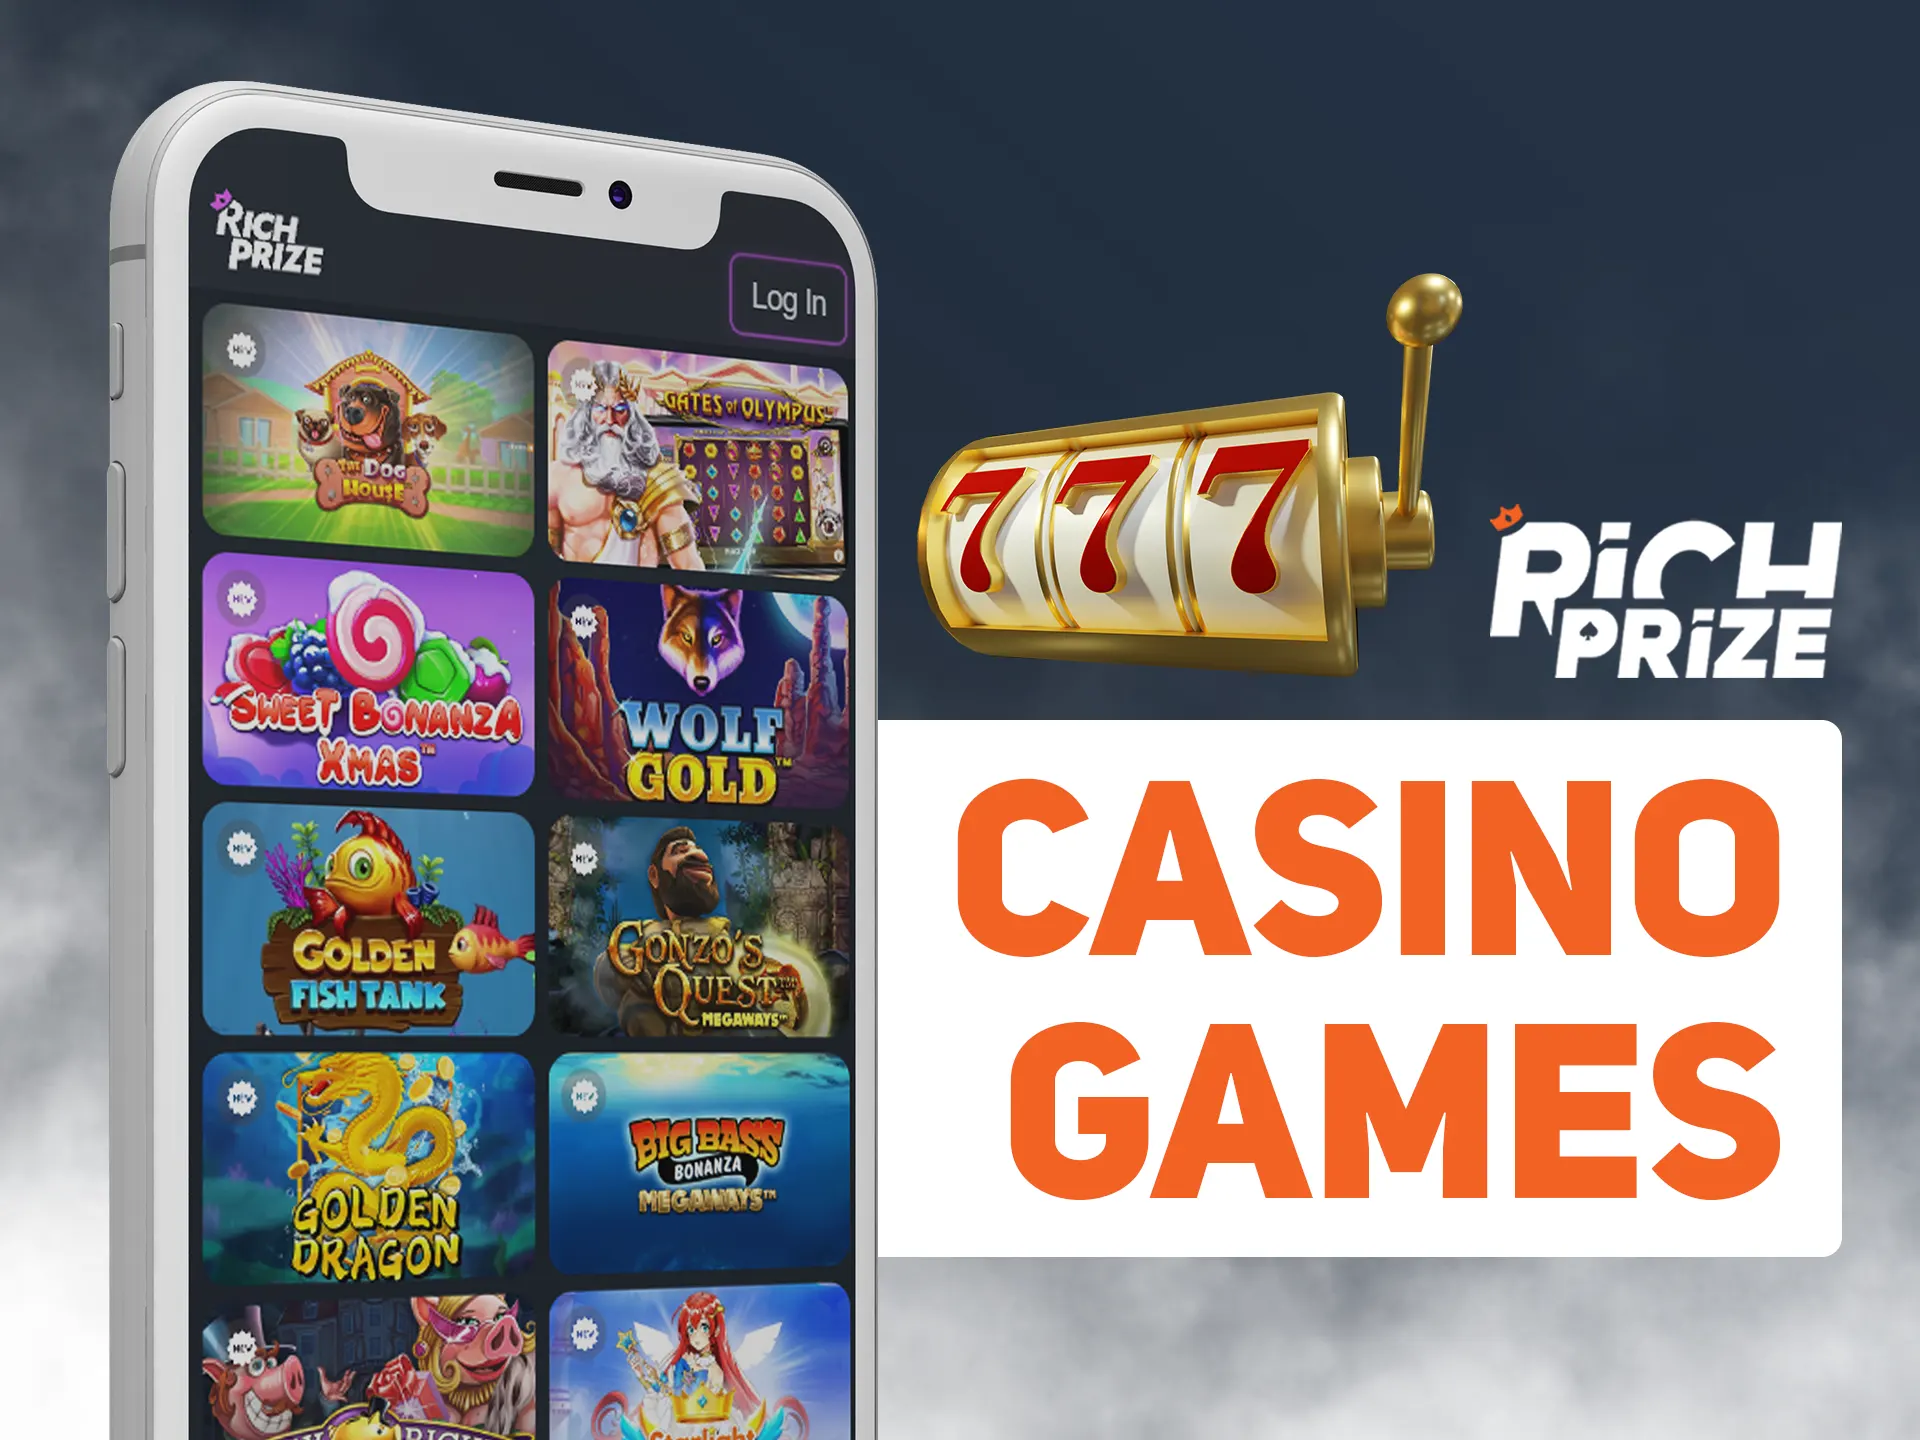 Search for your favourite casino games in Richprize app.